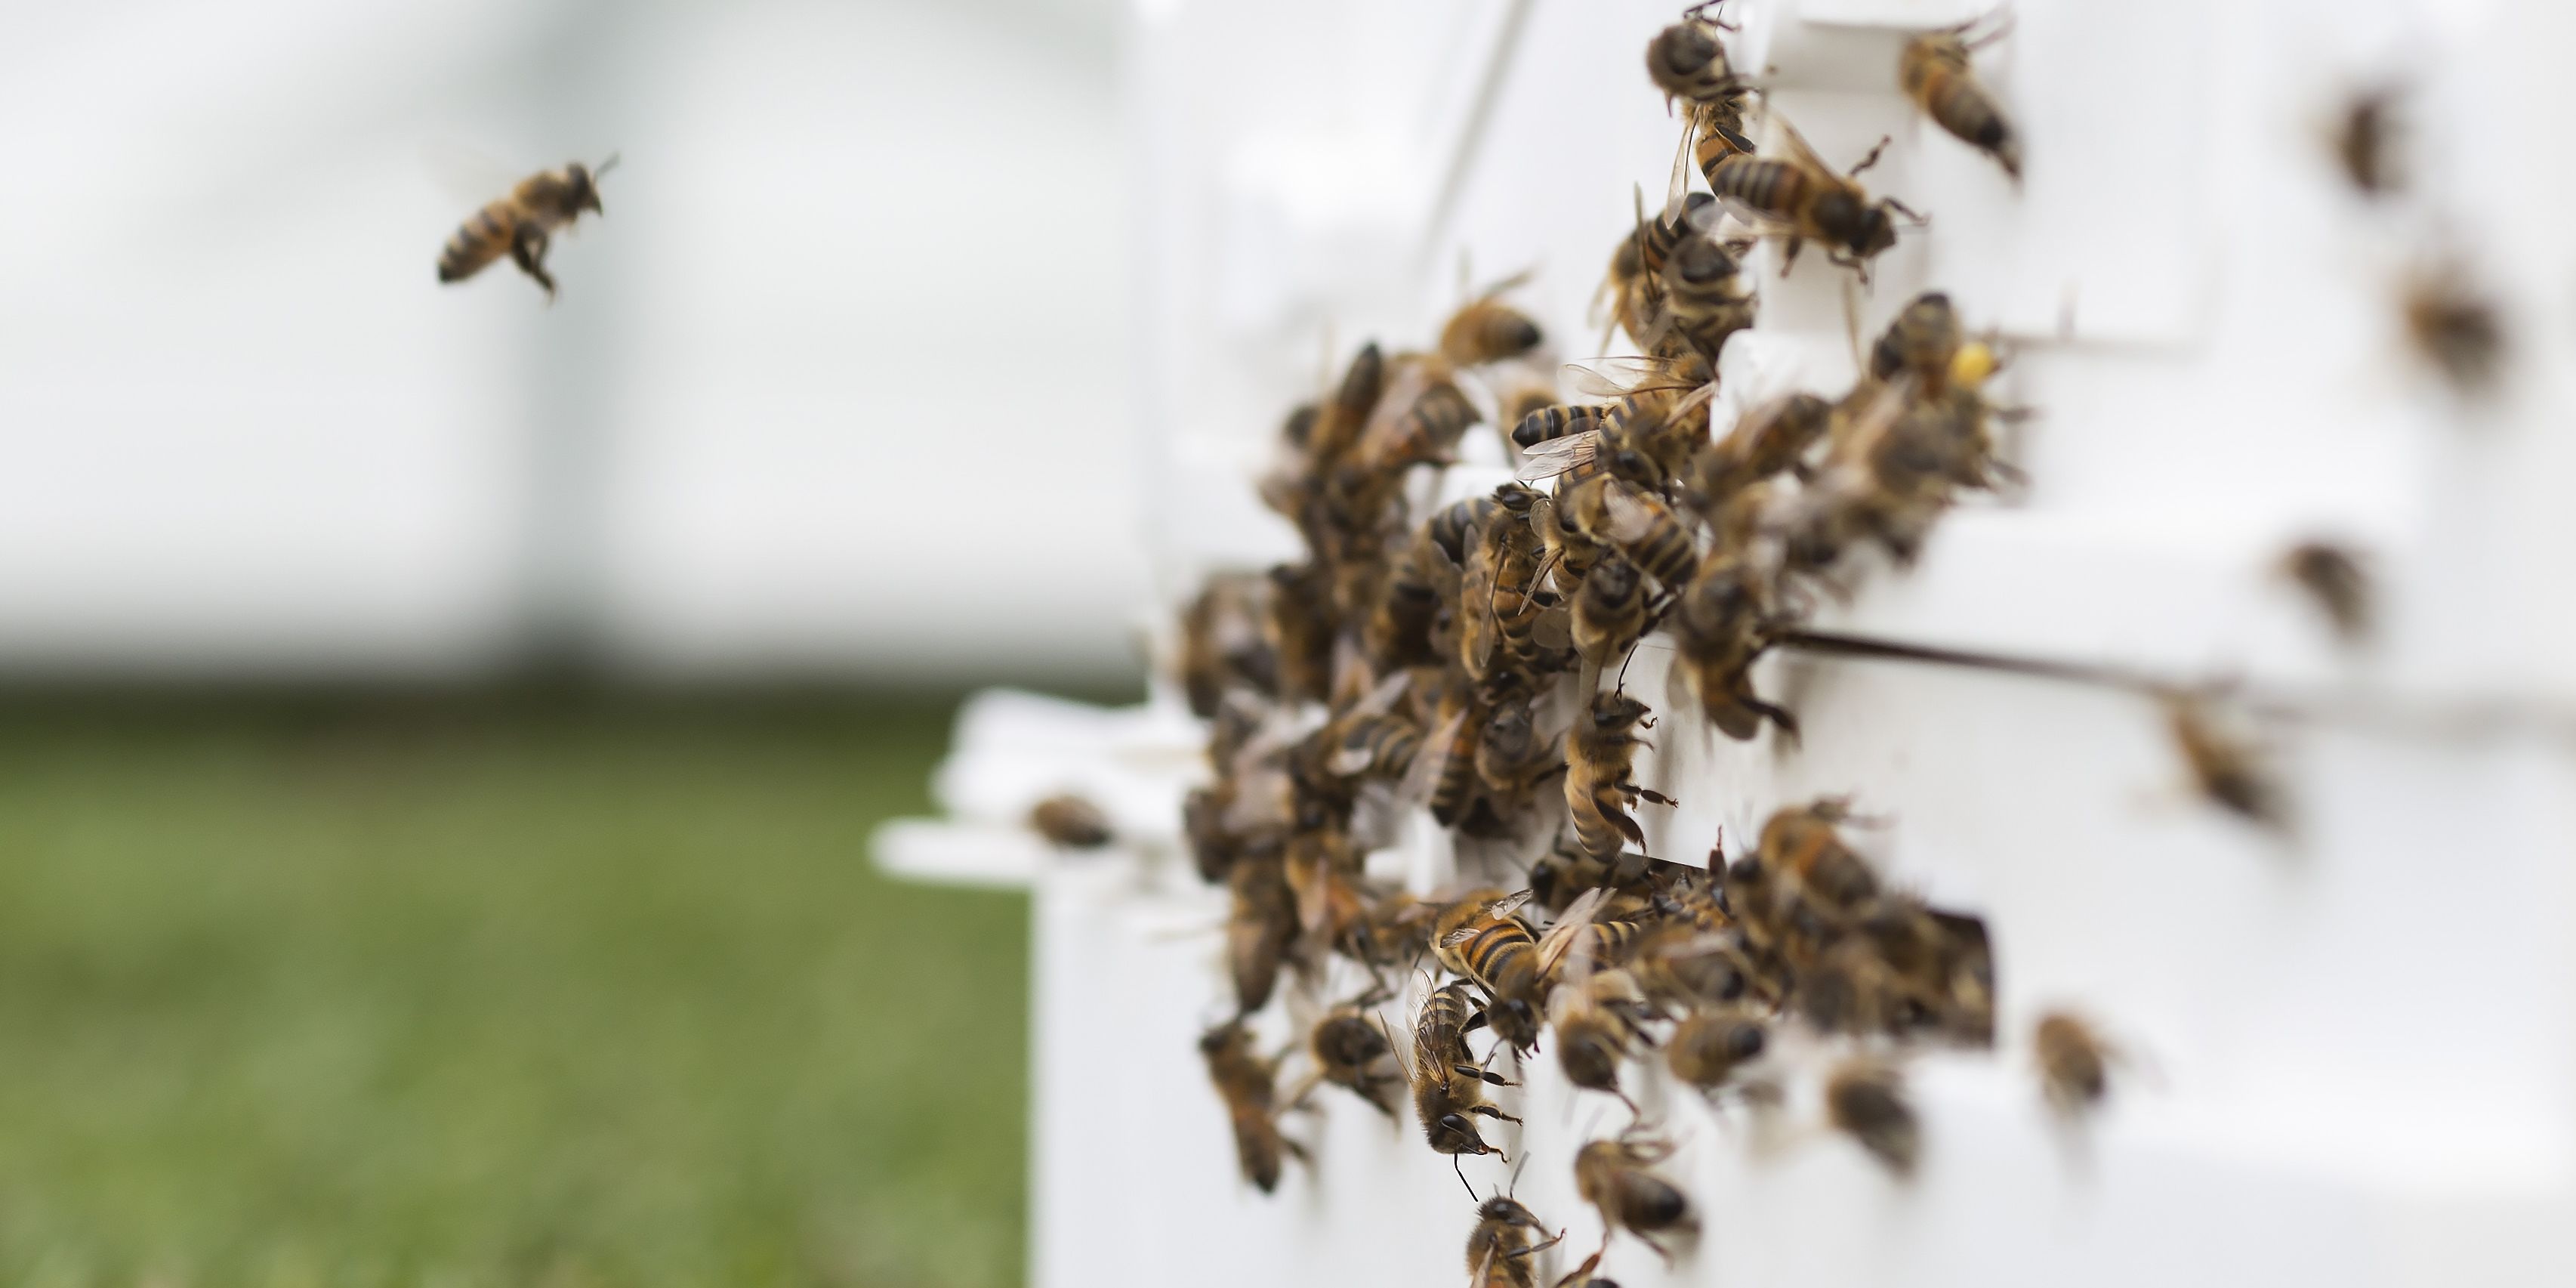 The easiest way to keep bees in your backyard